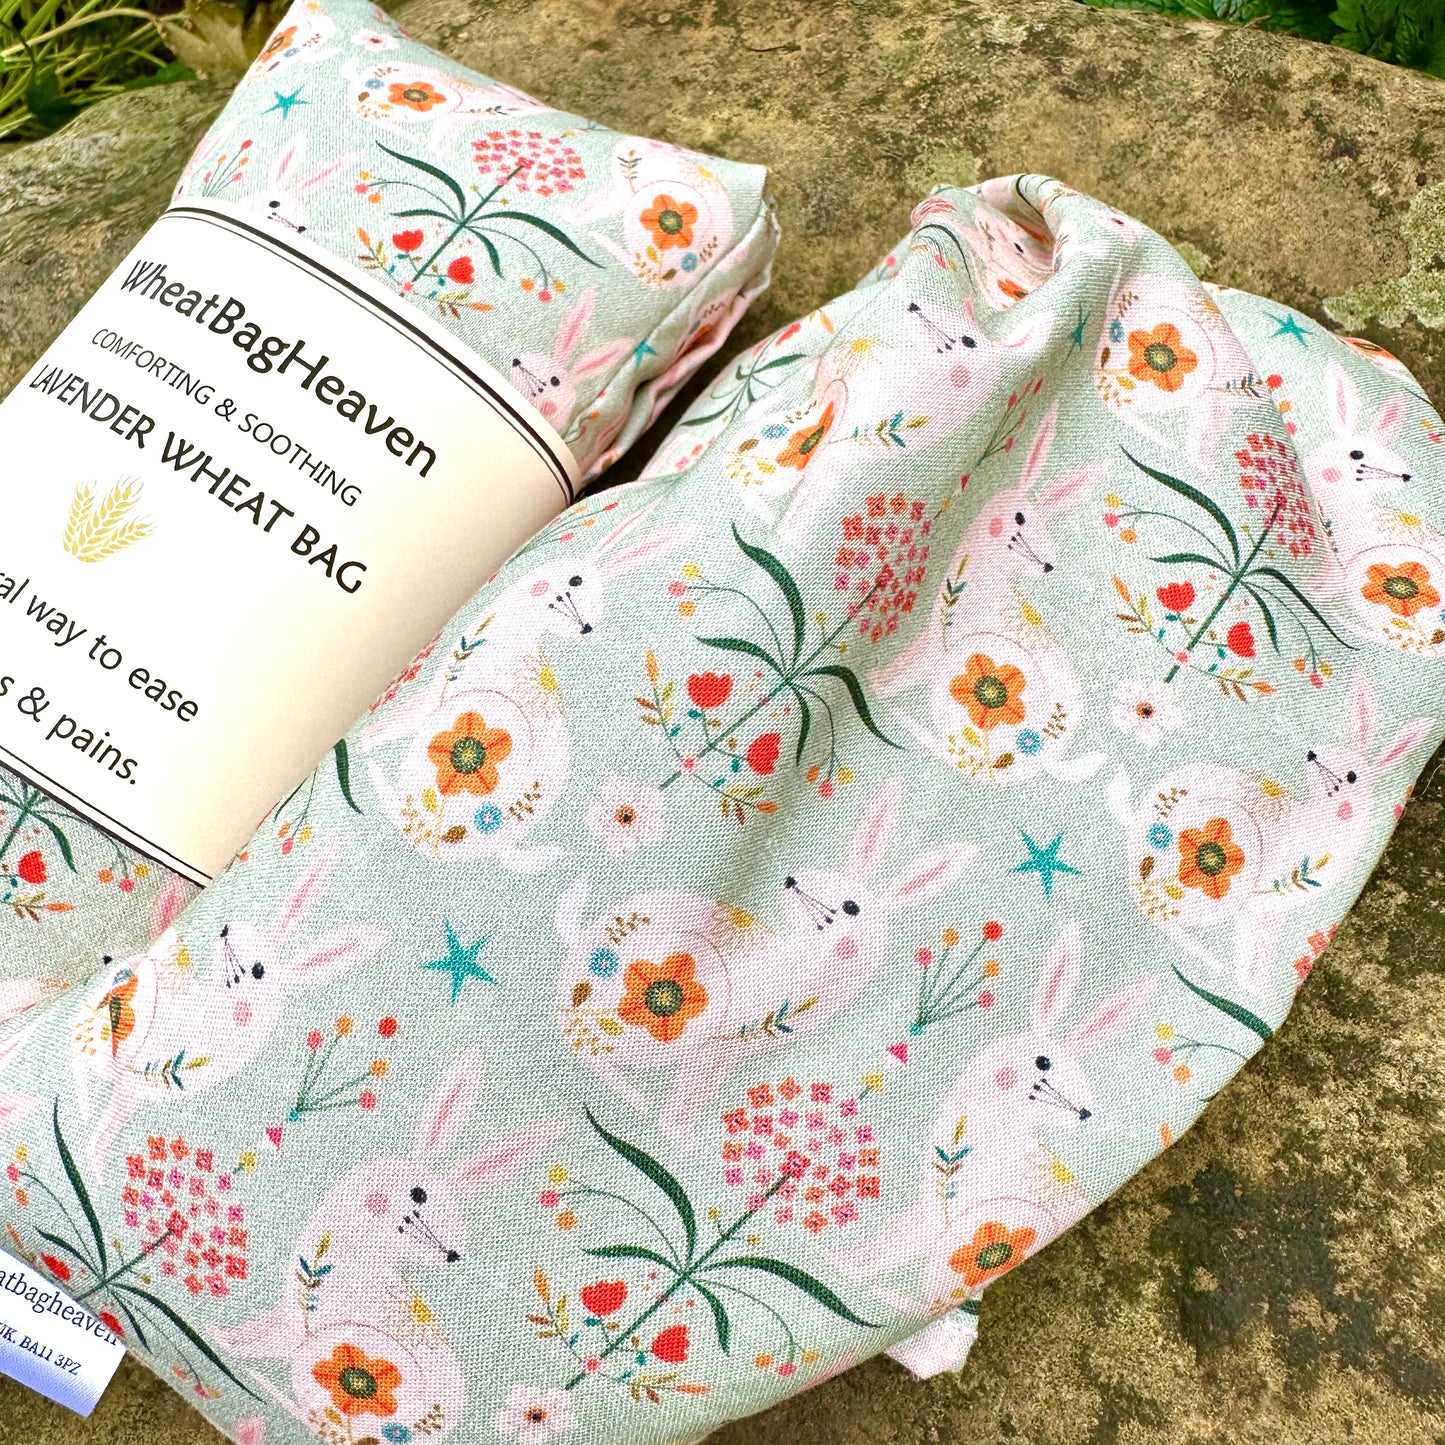 Bunny children’s heat pad. Lavender scented, long cotton wheat bag, snuggles, sleep and wellness gift